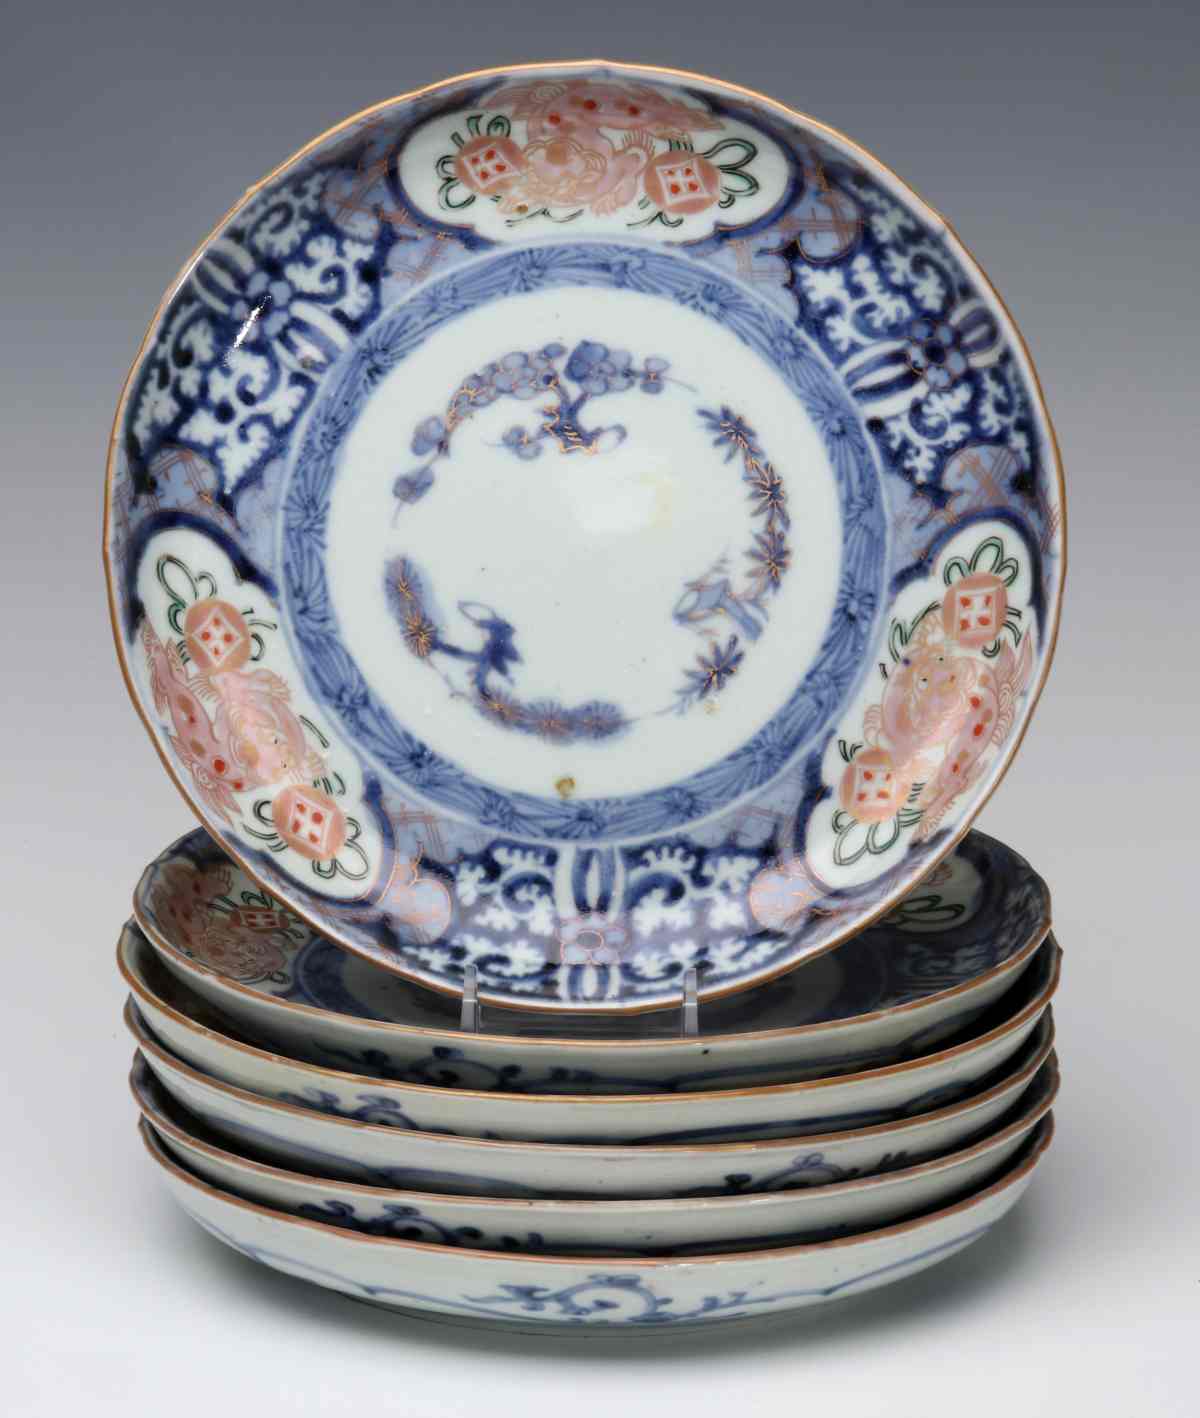 A SET OF SIX 18TH CENT JAPANESE PORCELAIN DISHES